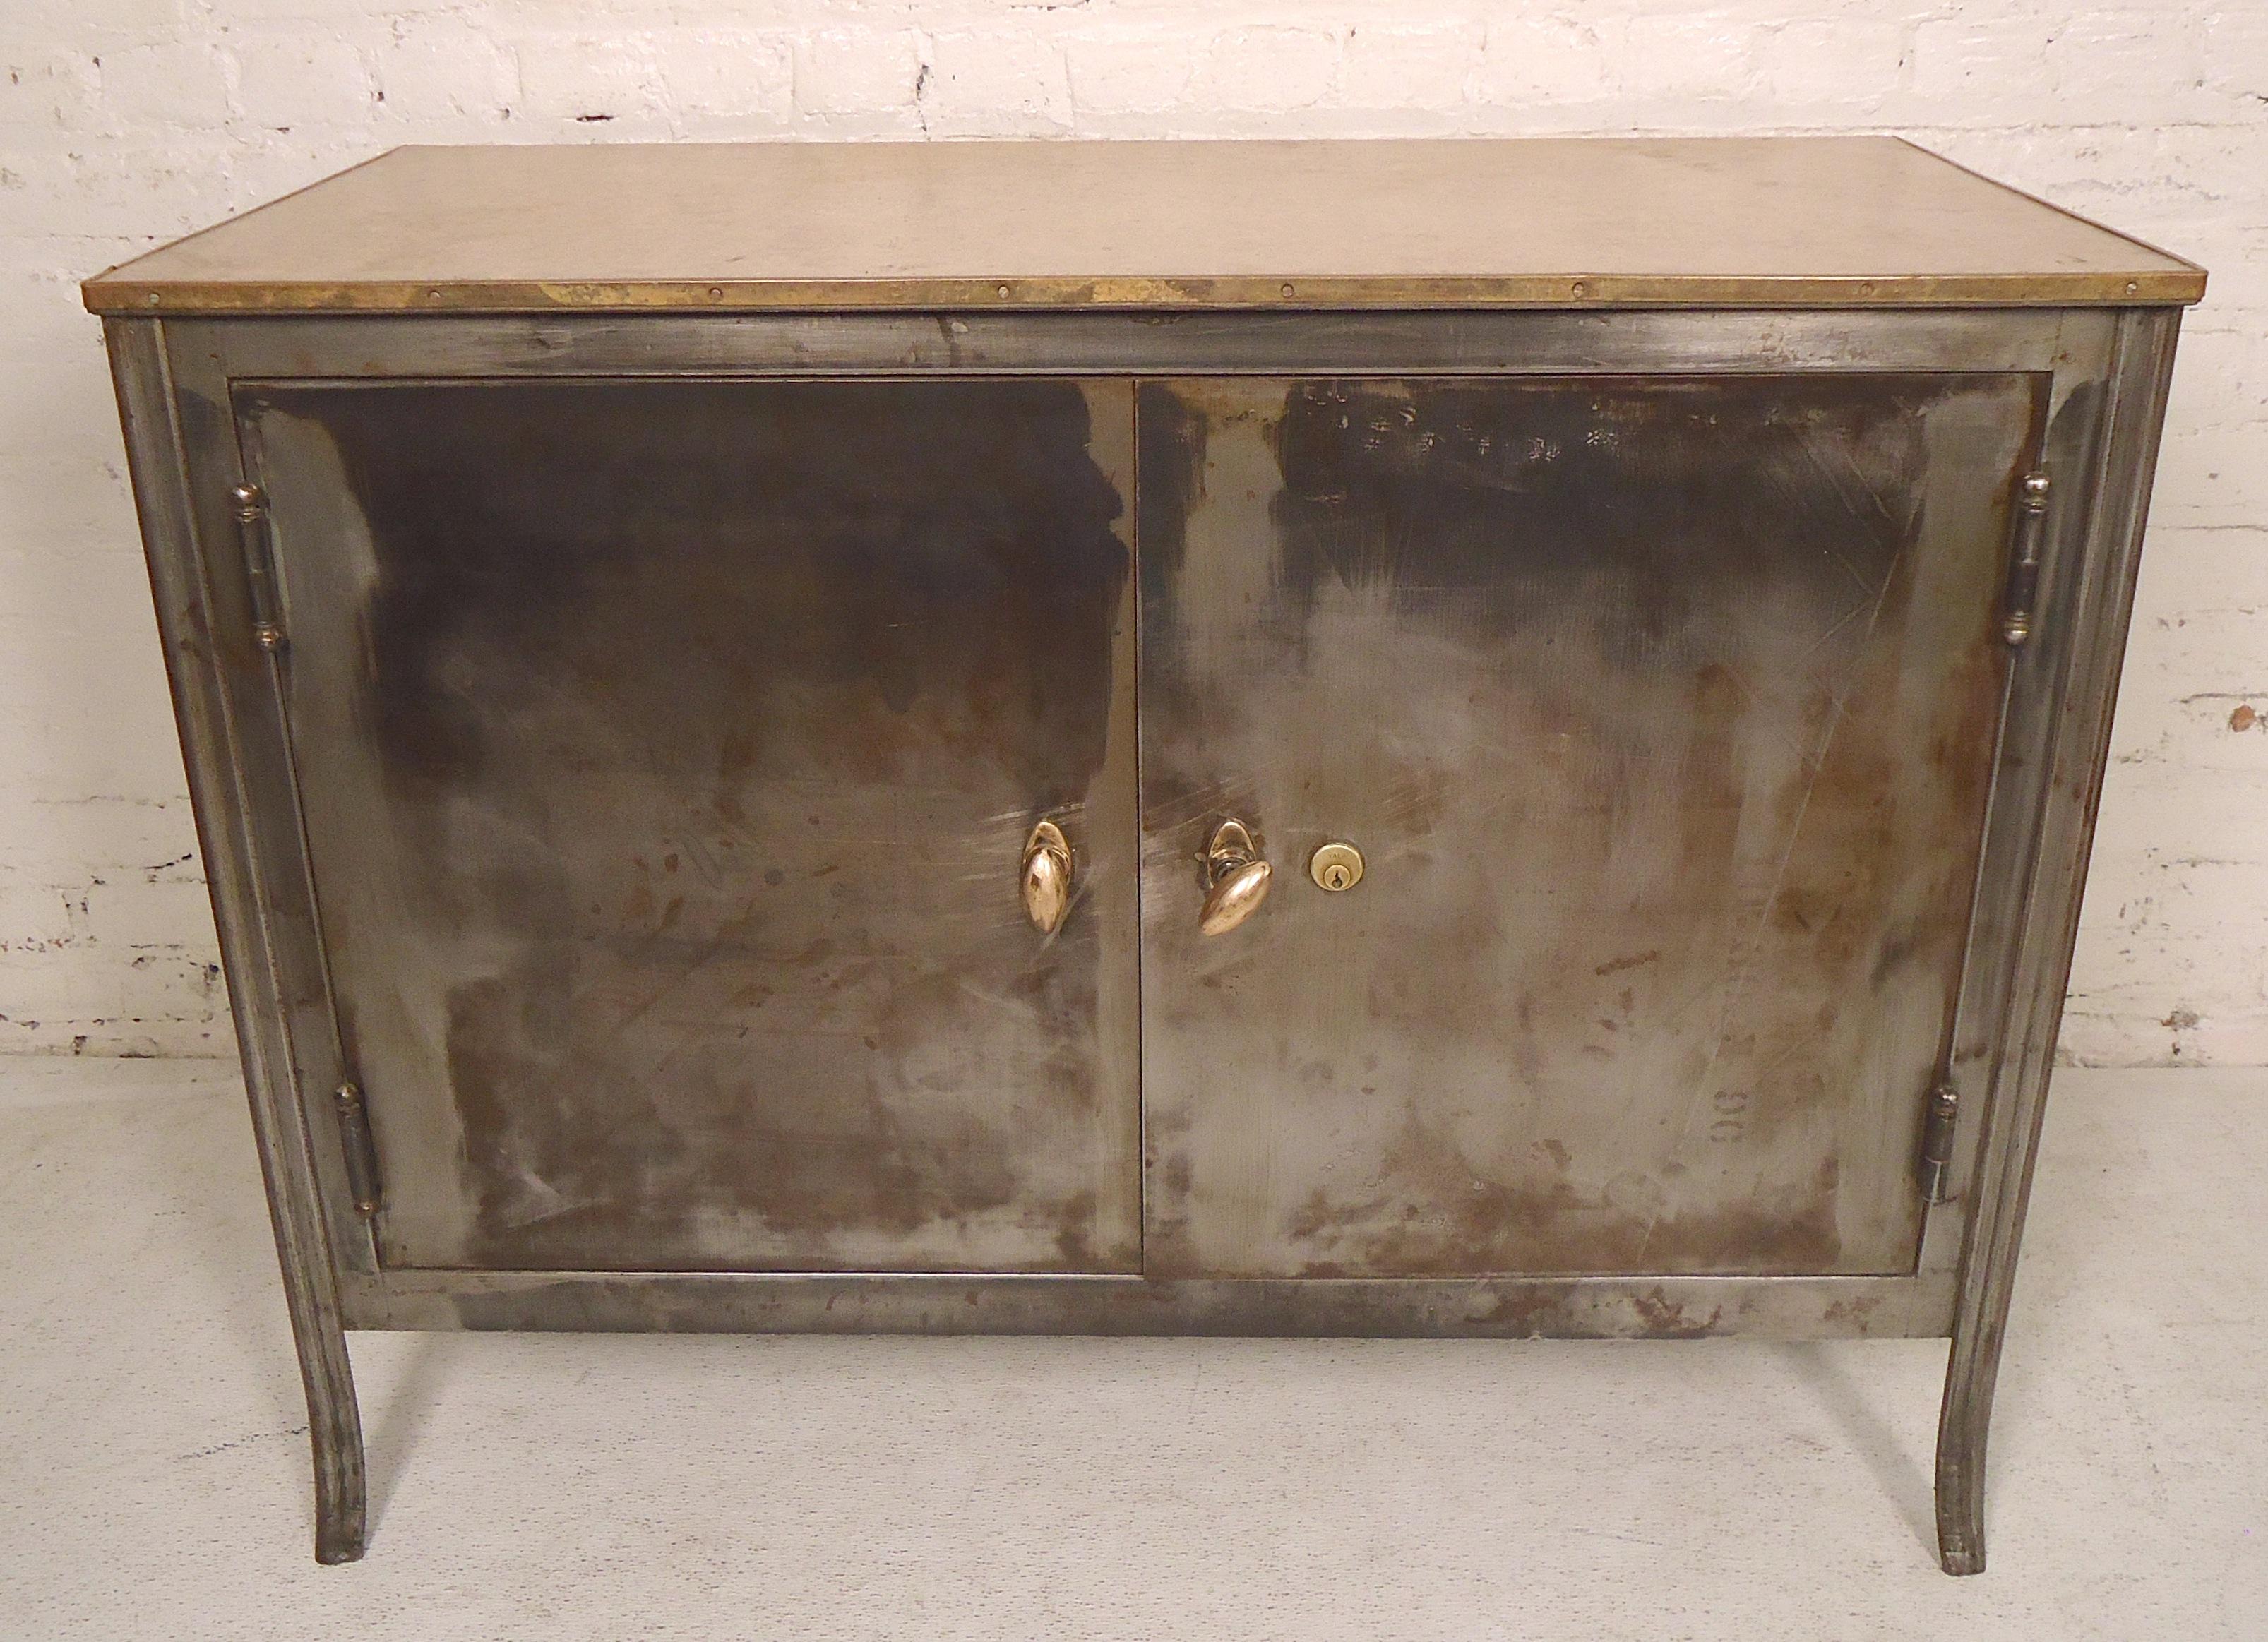 Handsome bare metal style finished two door cabinet with linoleum top. Great machine age style finish and coloring with brass hardware.

(Please confirm item location - NY or NJ - with dealer).
 